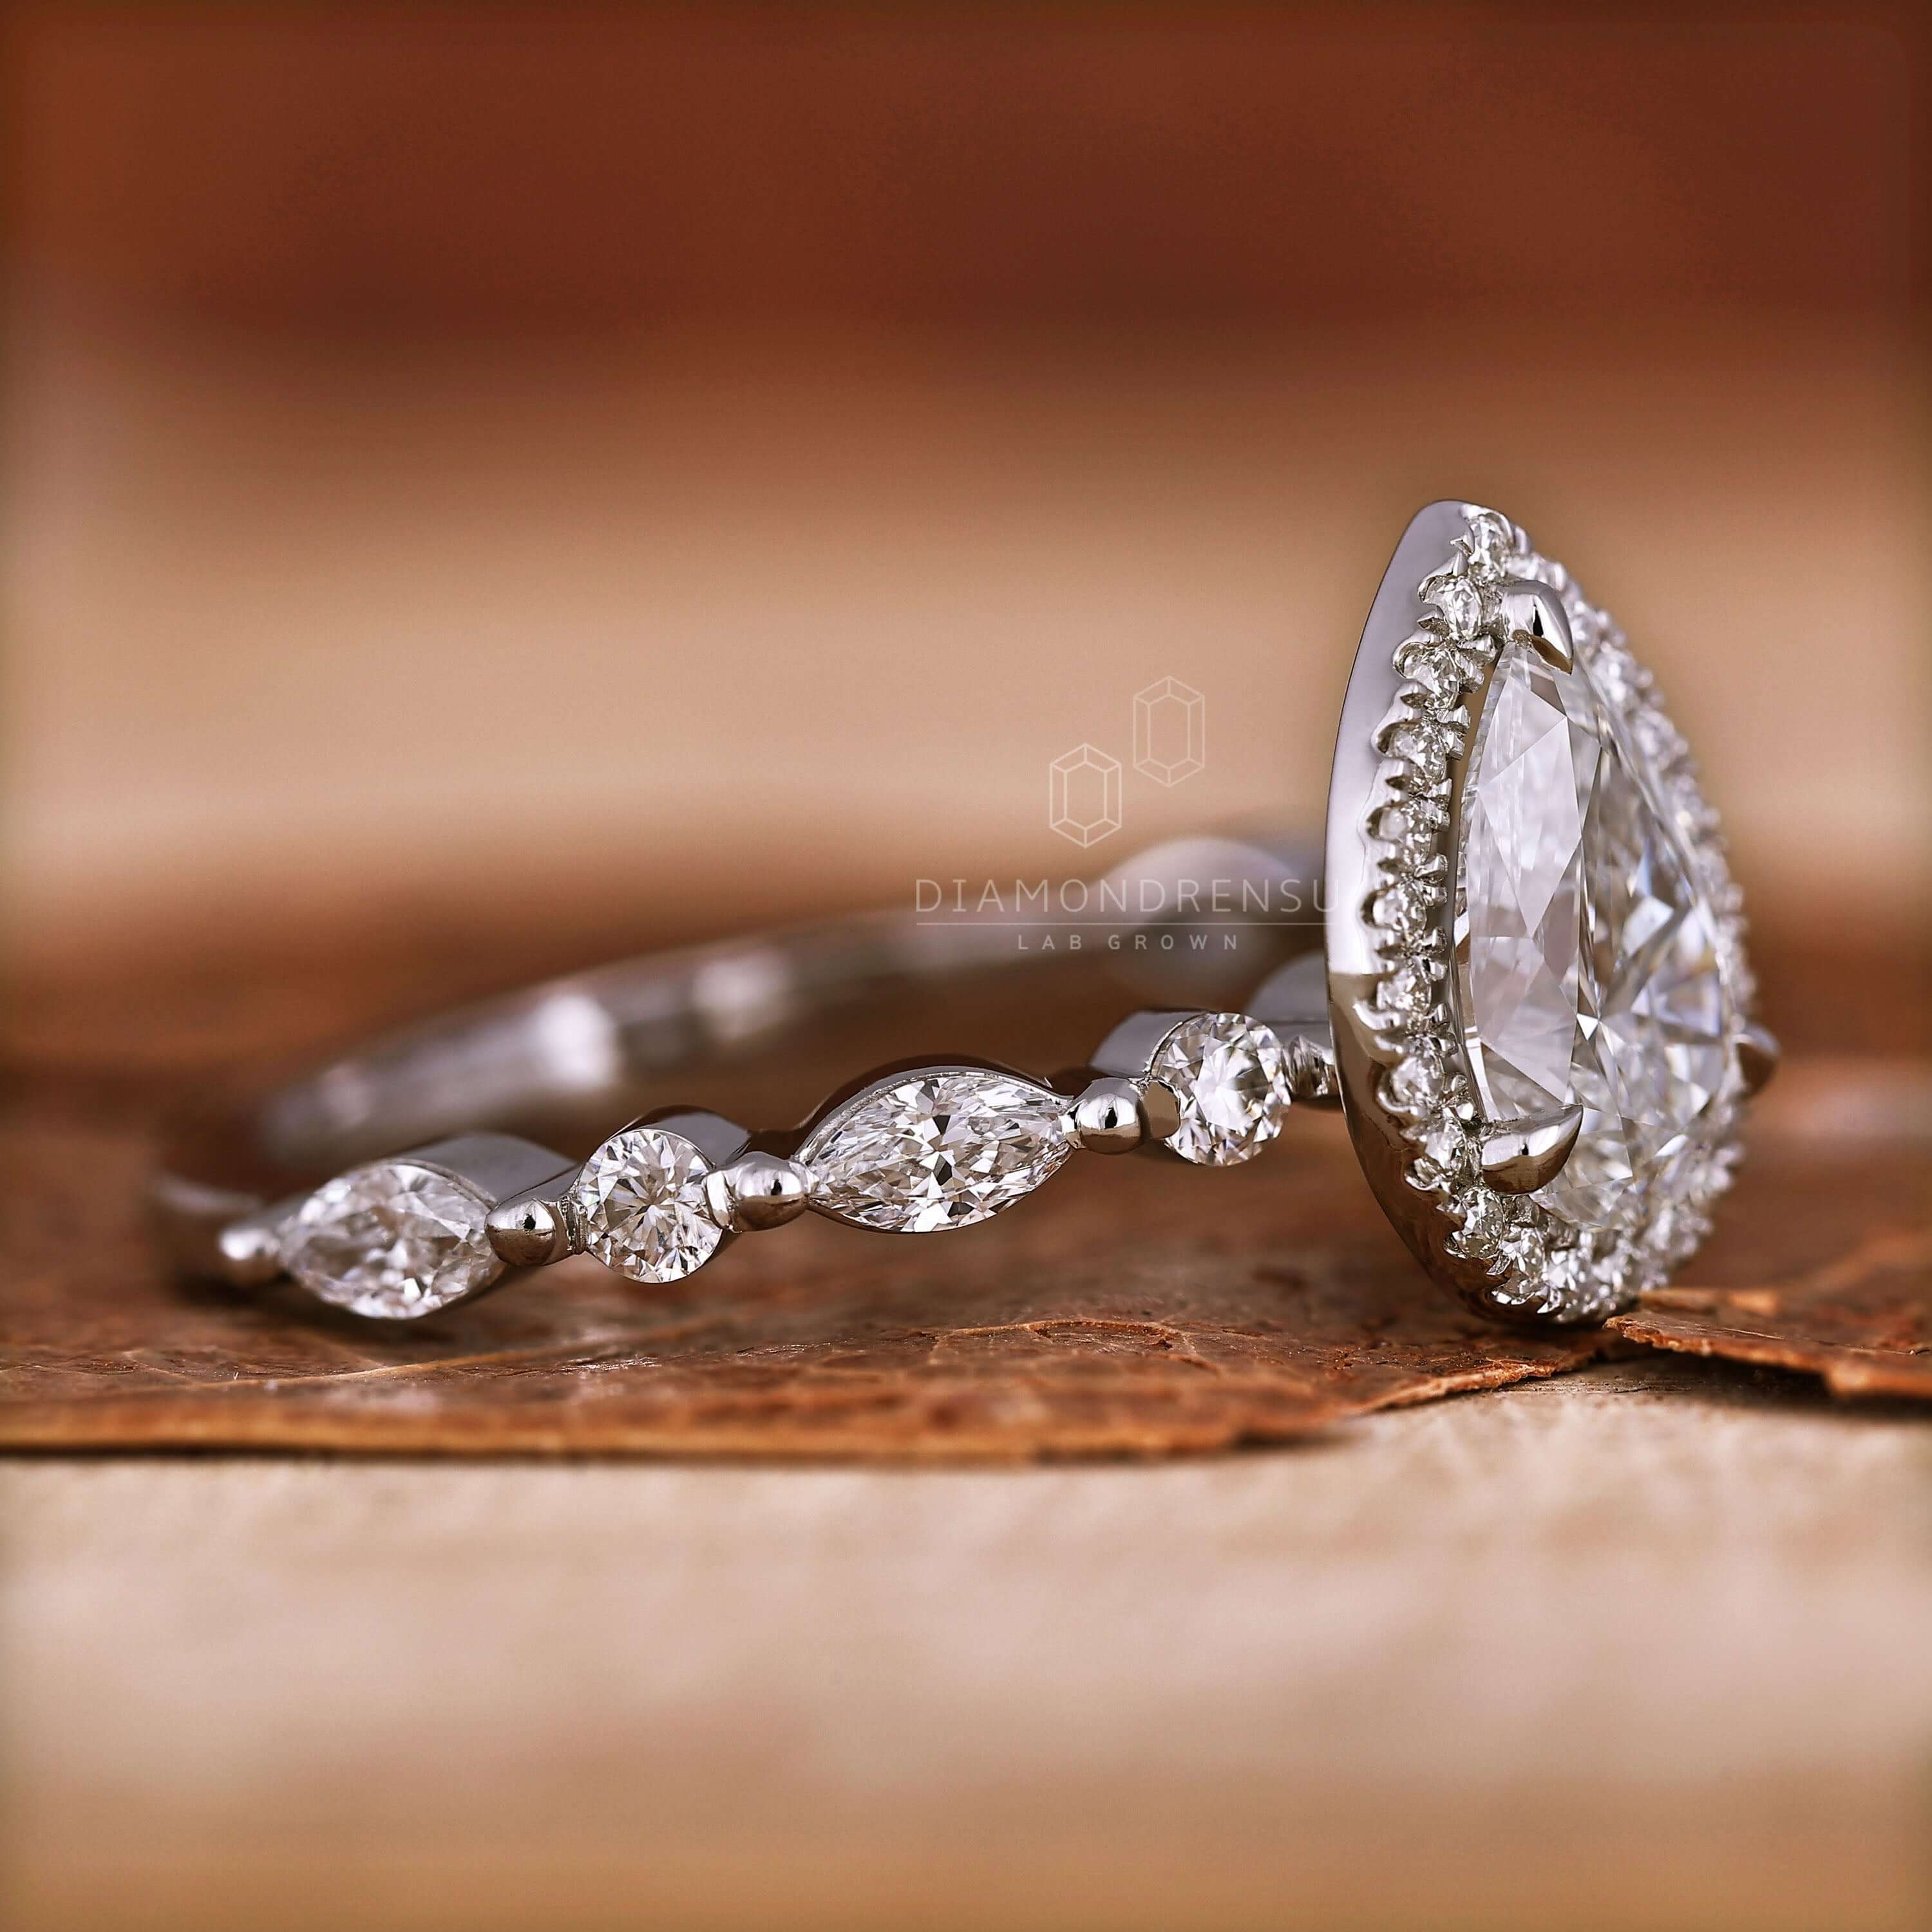 What Kind of Wedding Bands go With Halo Engagement Rings?